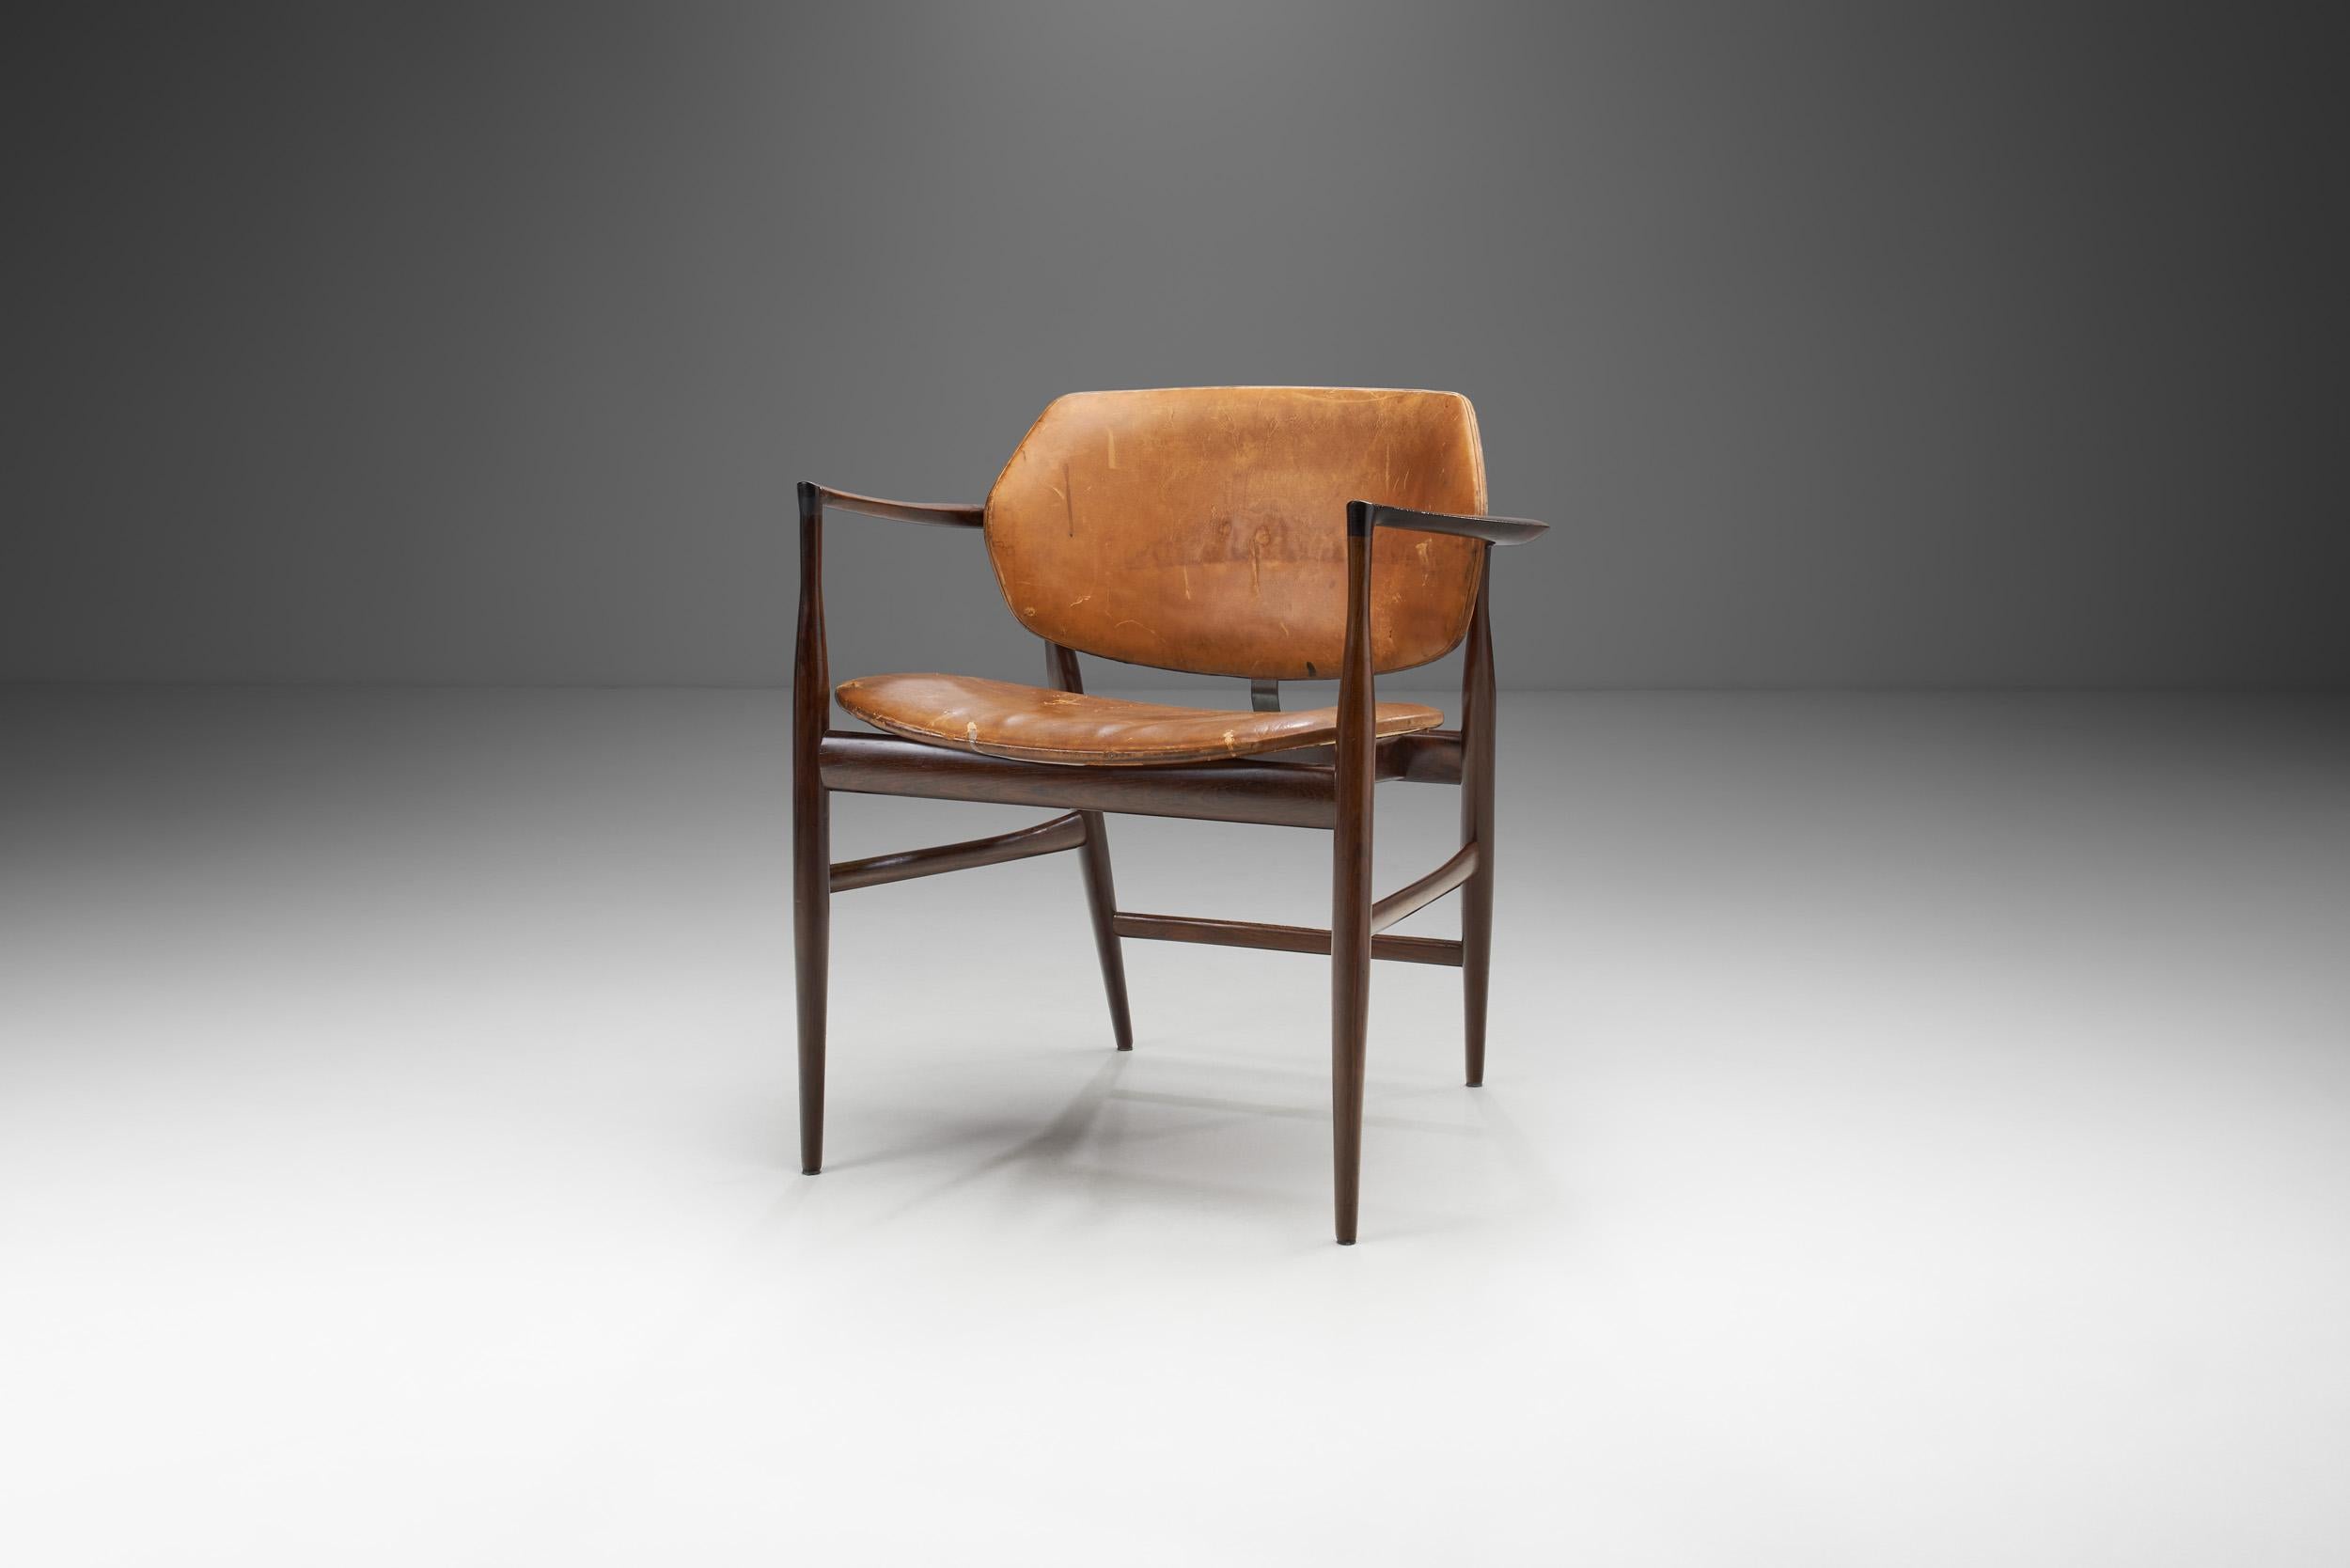 This chair by Danish design icon, Ib Kofod-Larsen, was designed and launched in 1958 as a writing chair to be coordinated with the equally famous model IL-01. Produced by Christensen & Larsen in Denmark, this “Elizabeth” armchair is a rare and